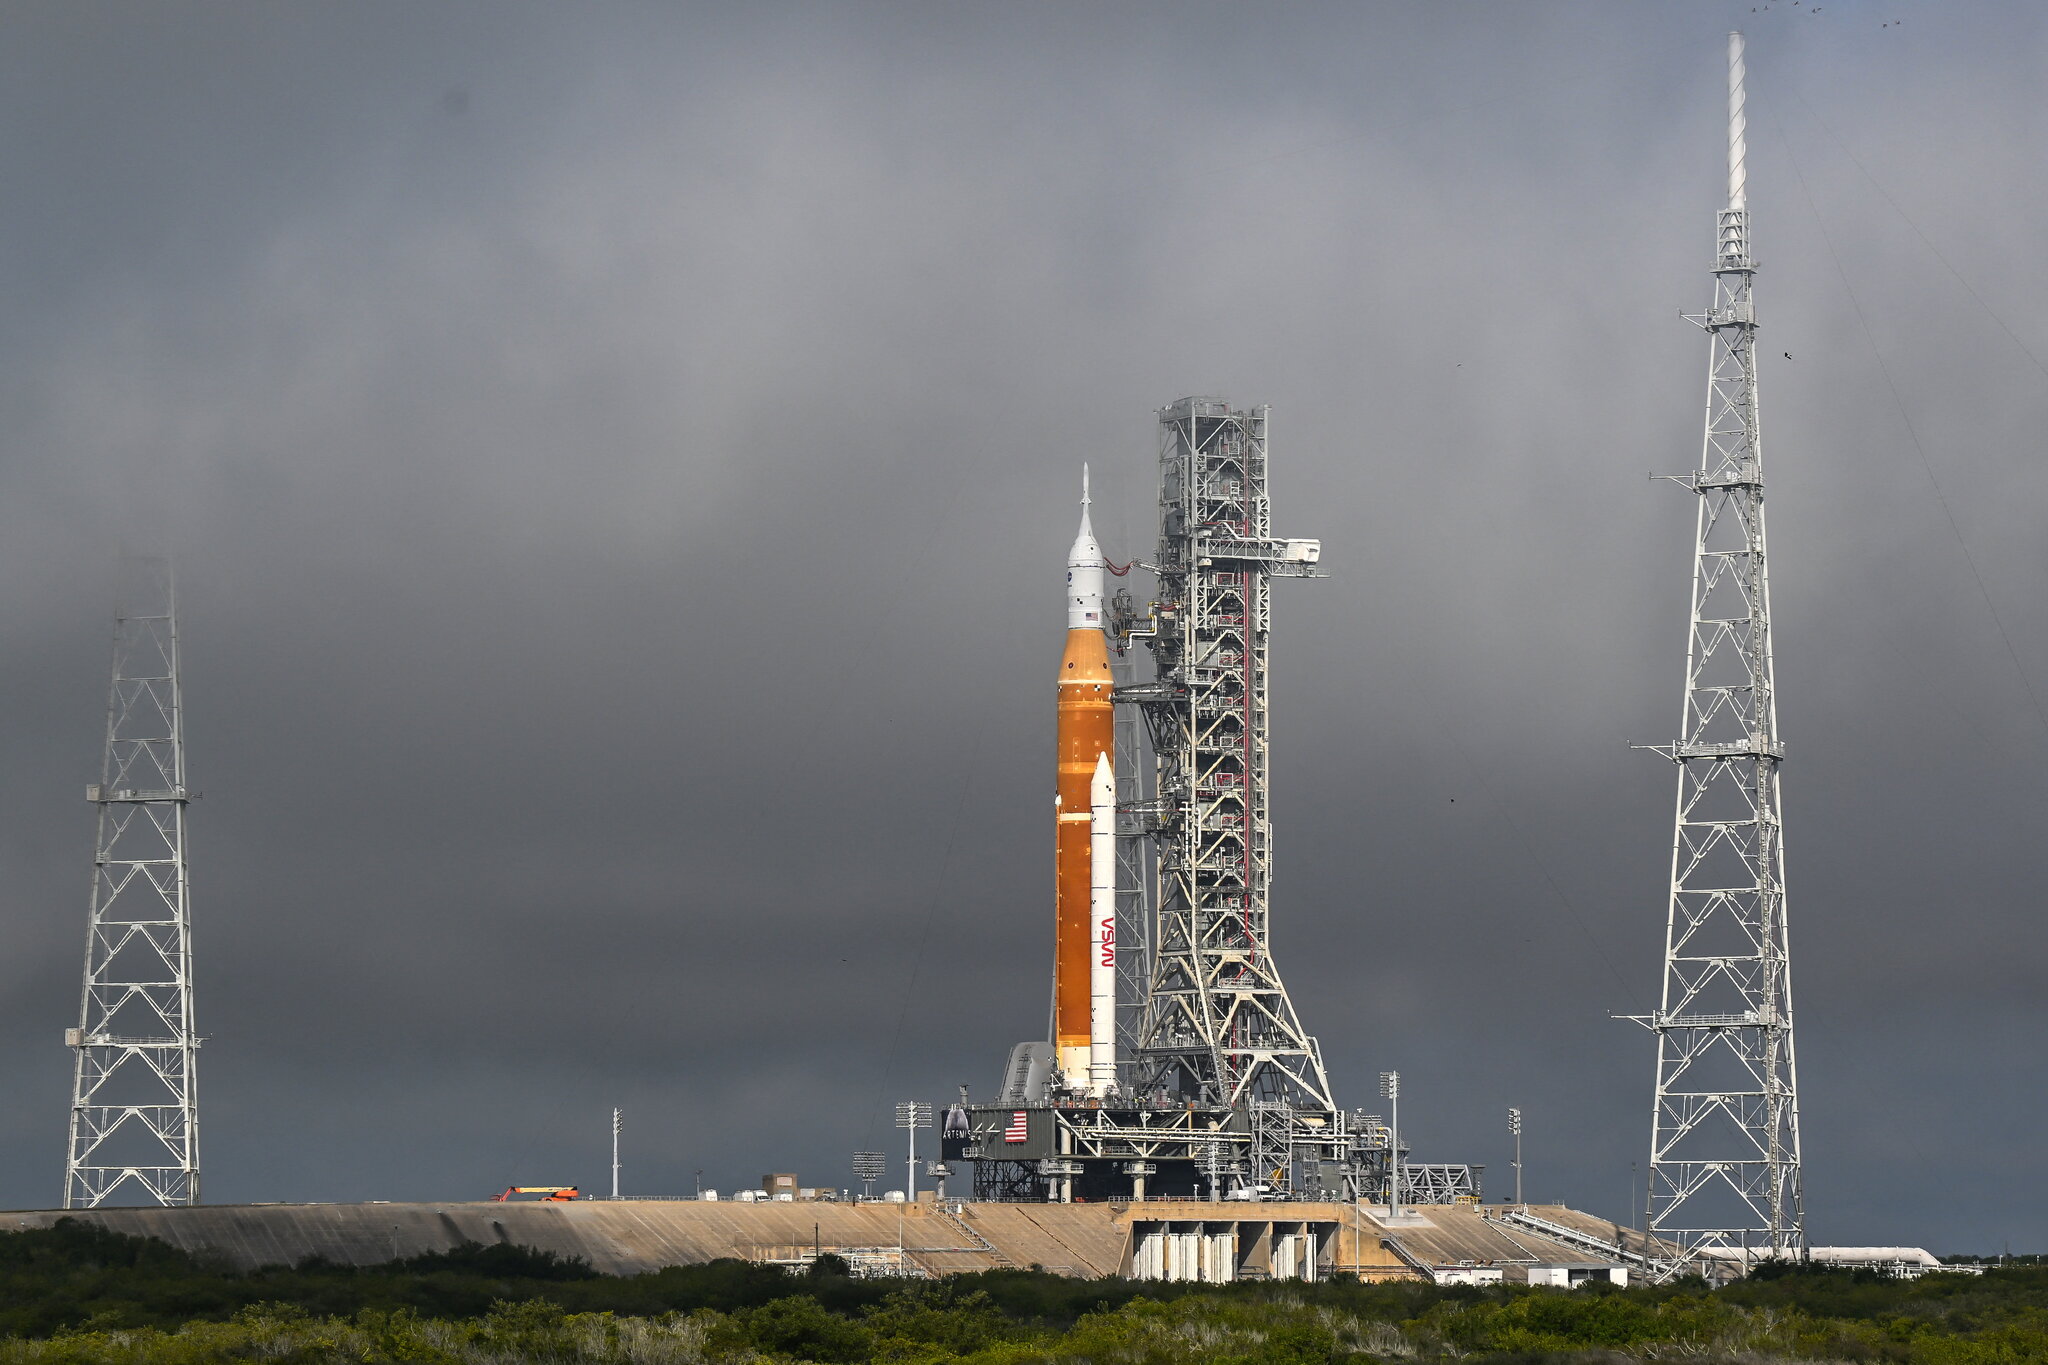 NASA will move its lunar rocket from the launchpad for repairs